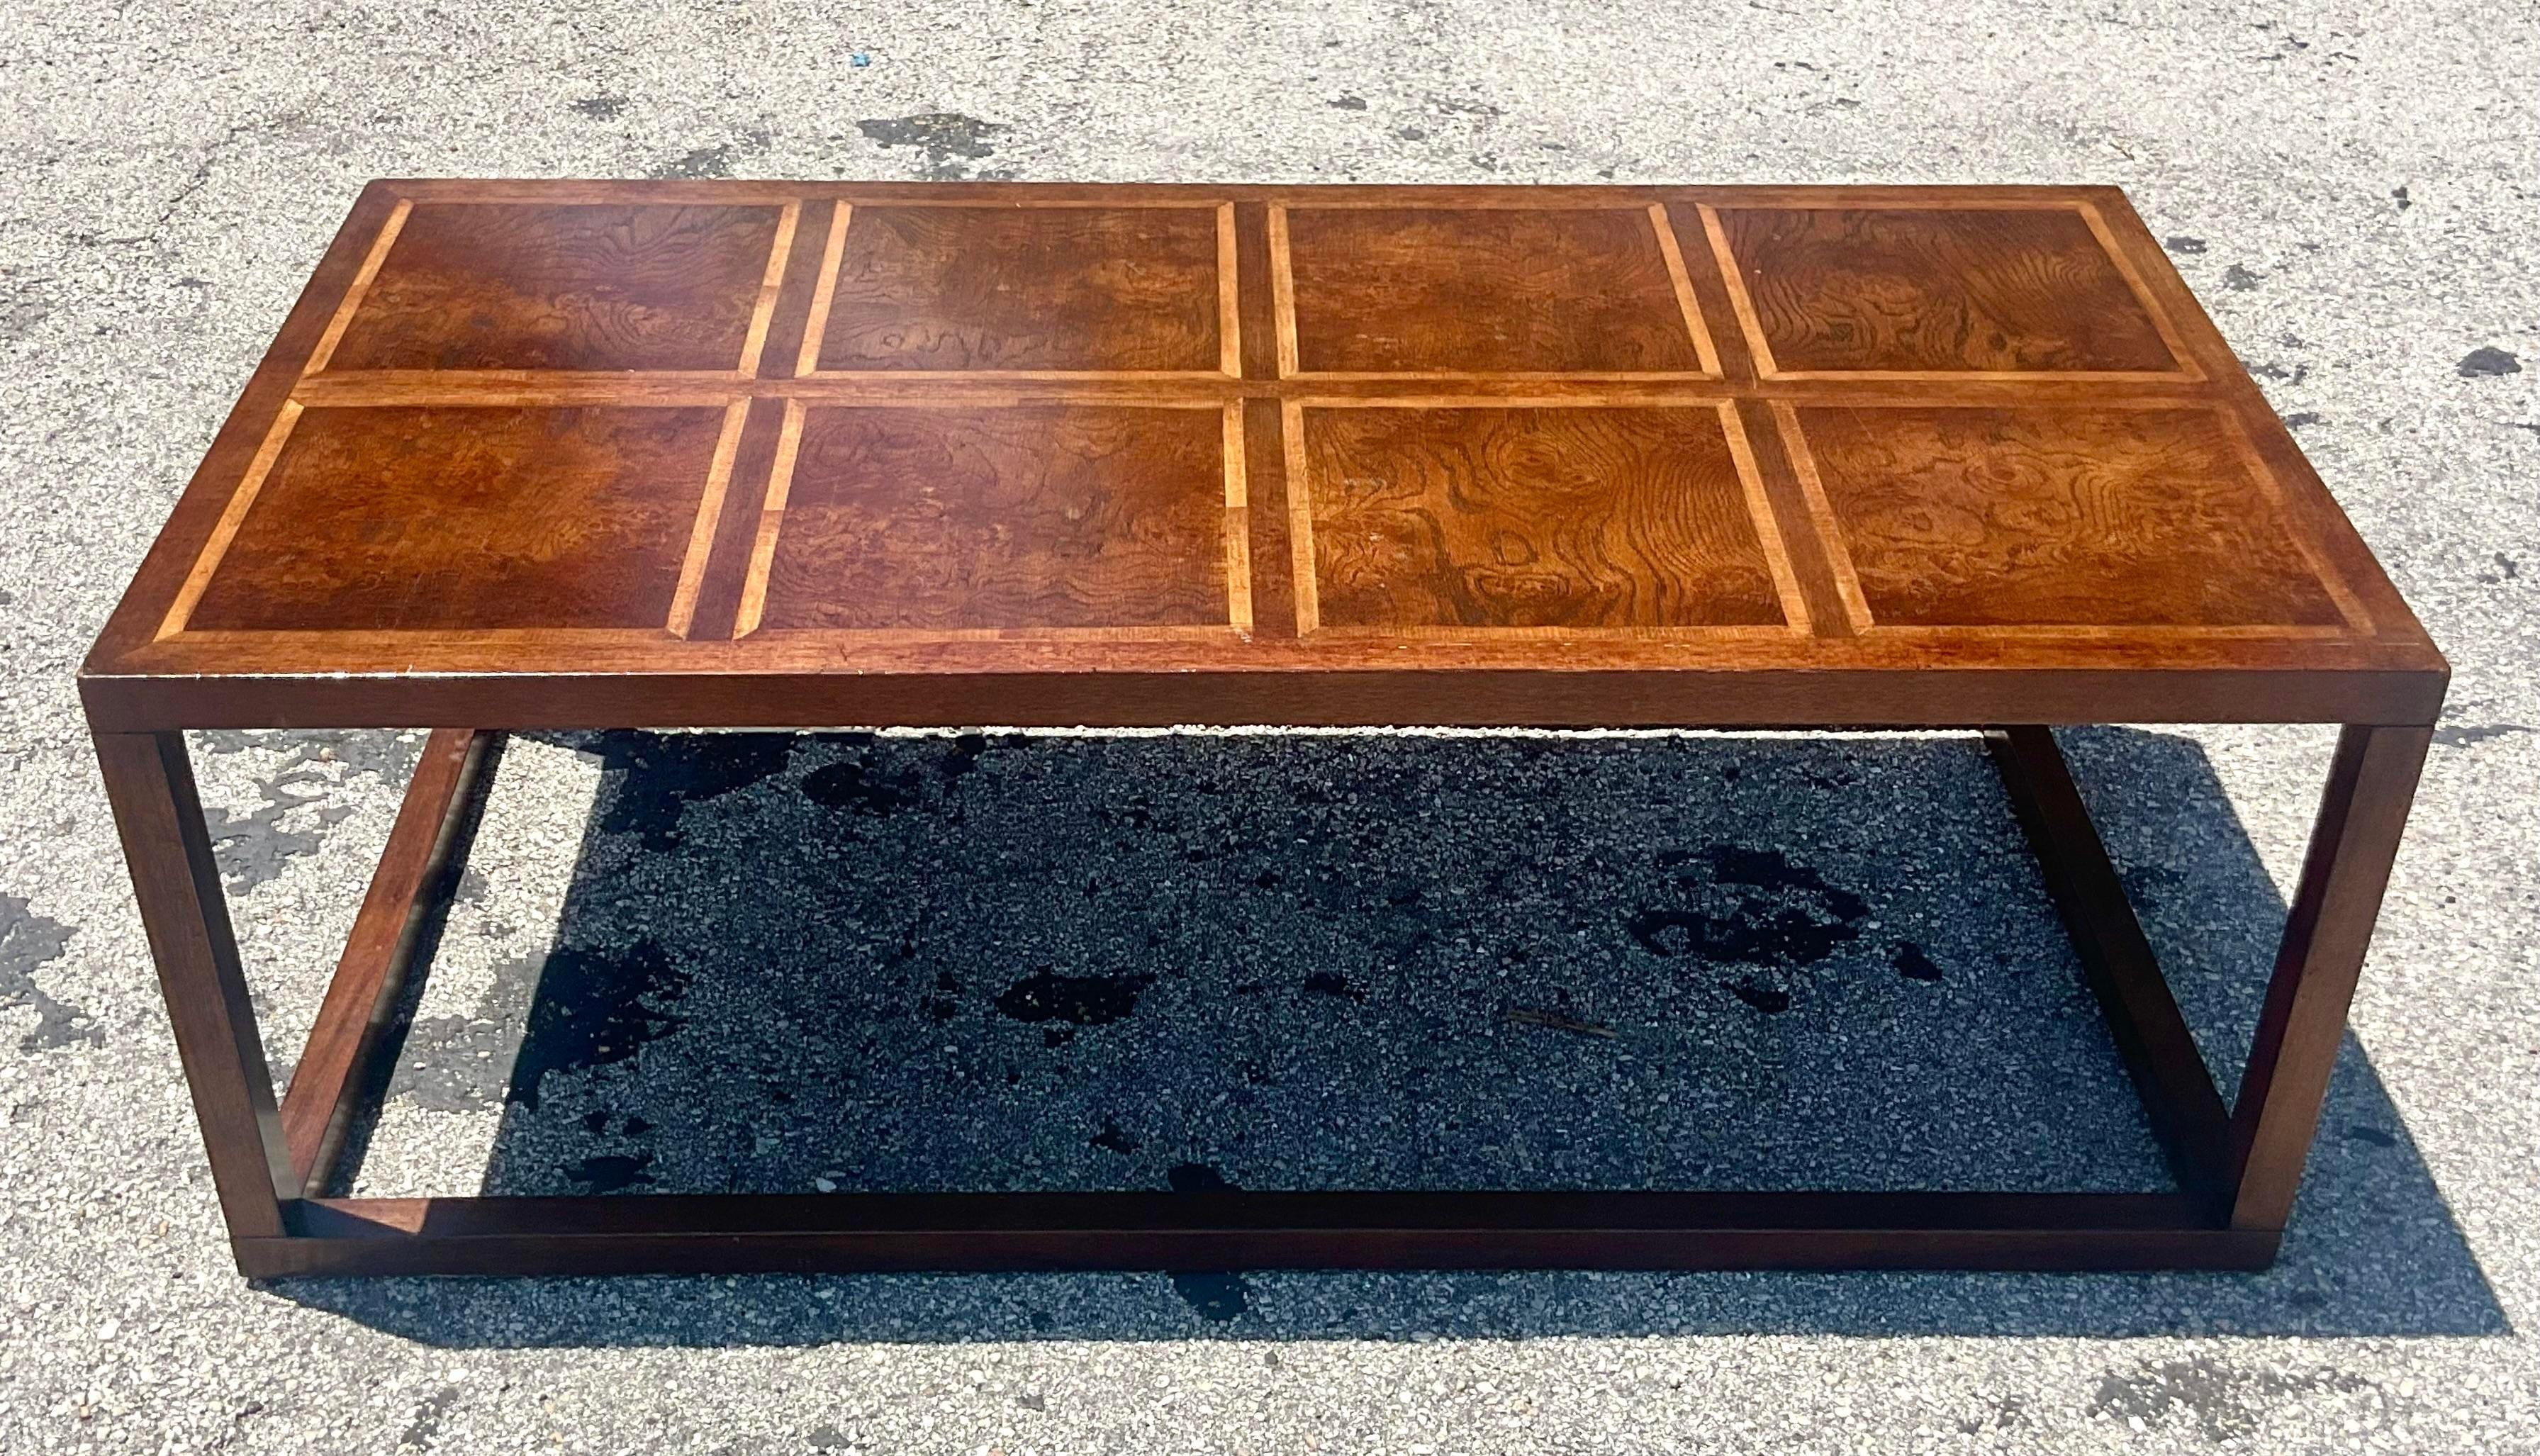 A vintage Regency wood Burl coffee table. Made by the iconic Baker Furniture group. Beautiful grid design with gorgeous wood grain detail. Tagged on the bottom. Acquired from a Palm Beach estate. 